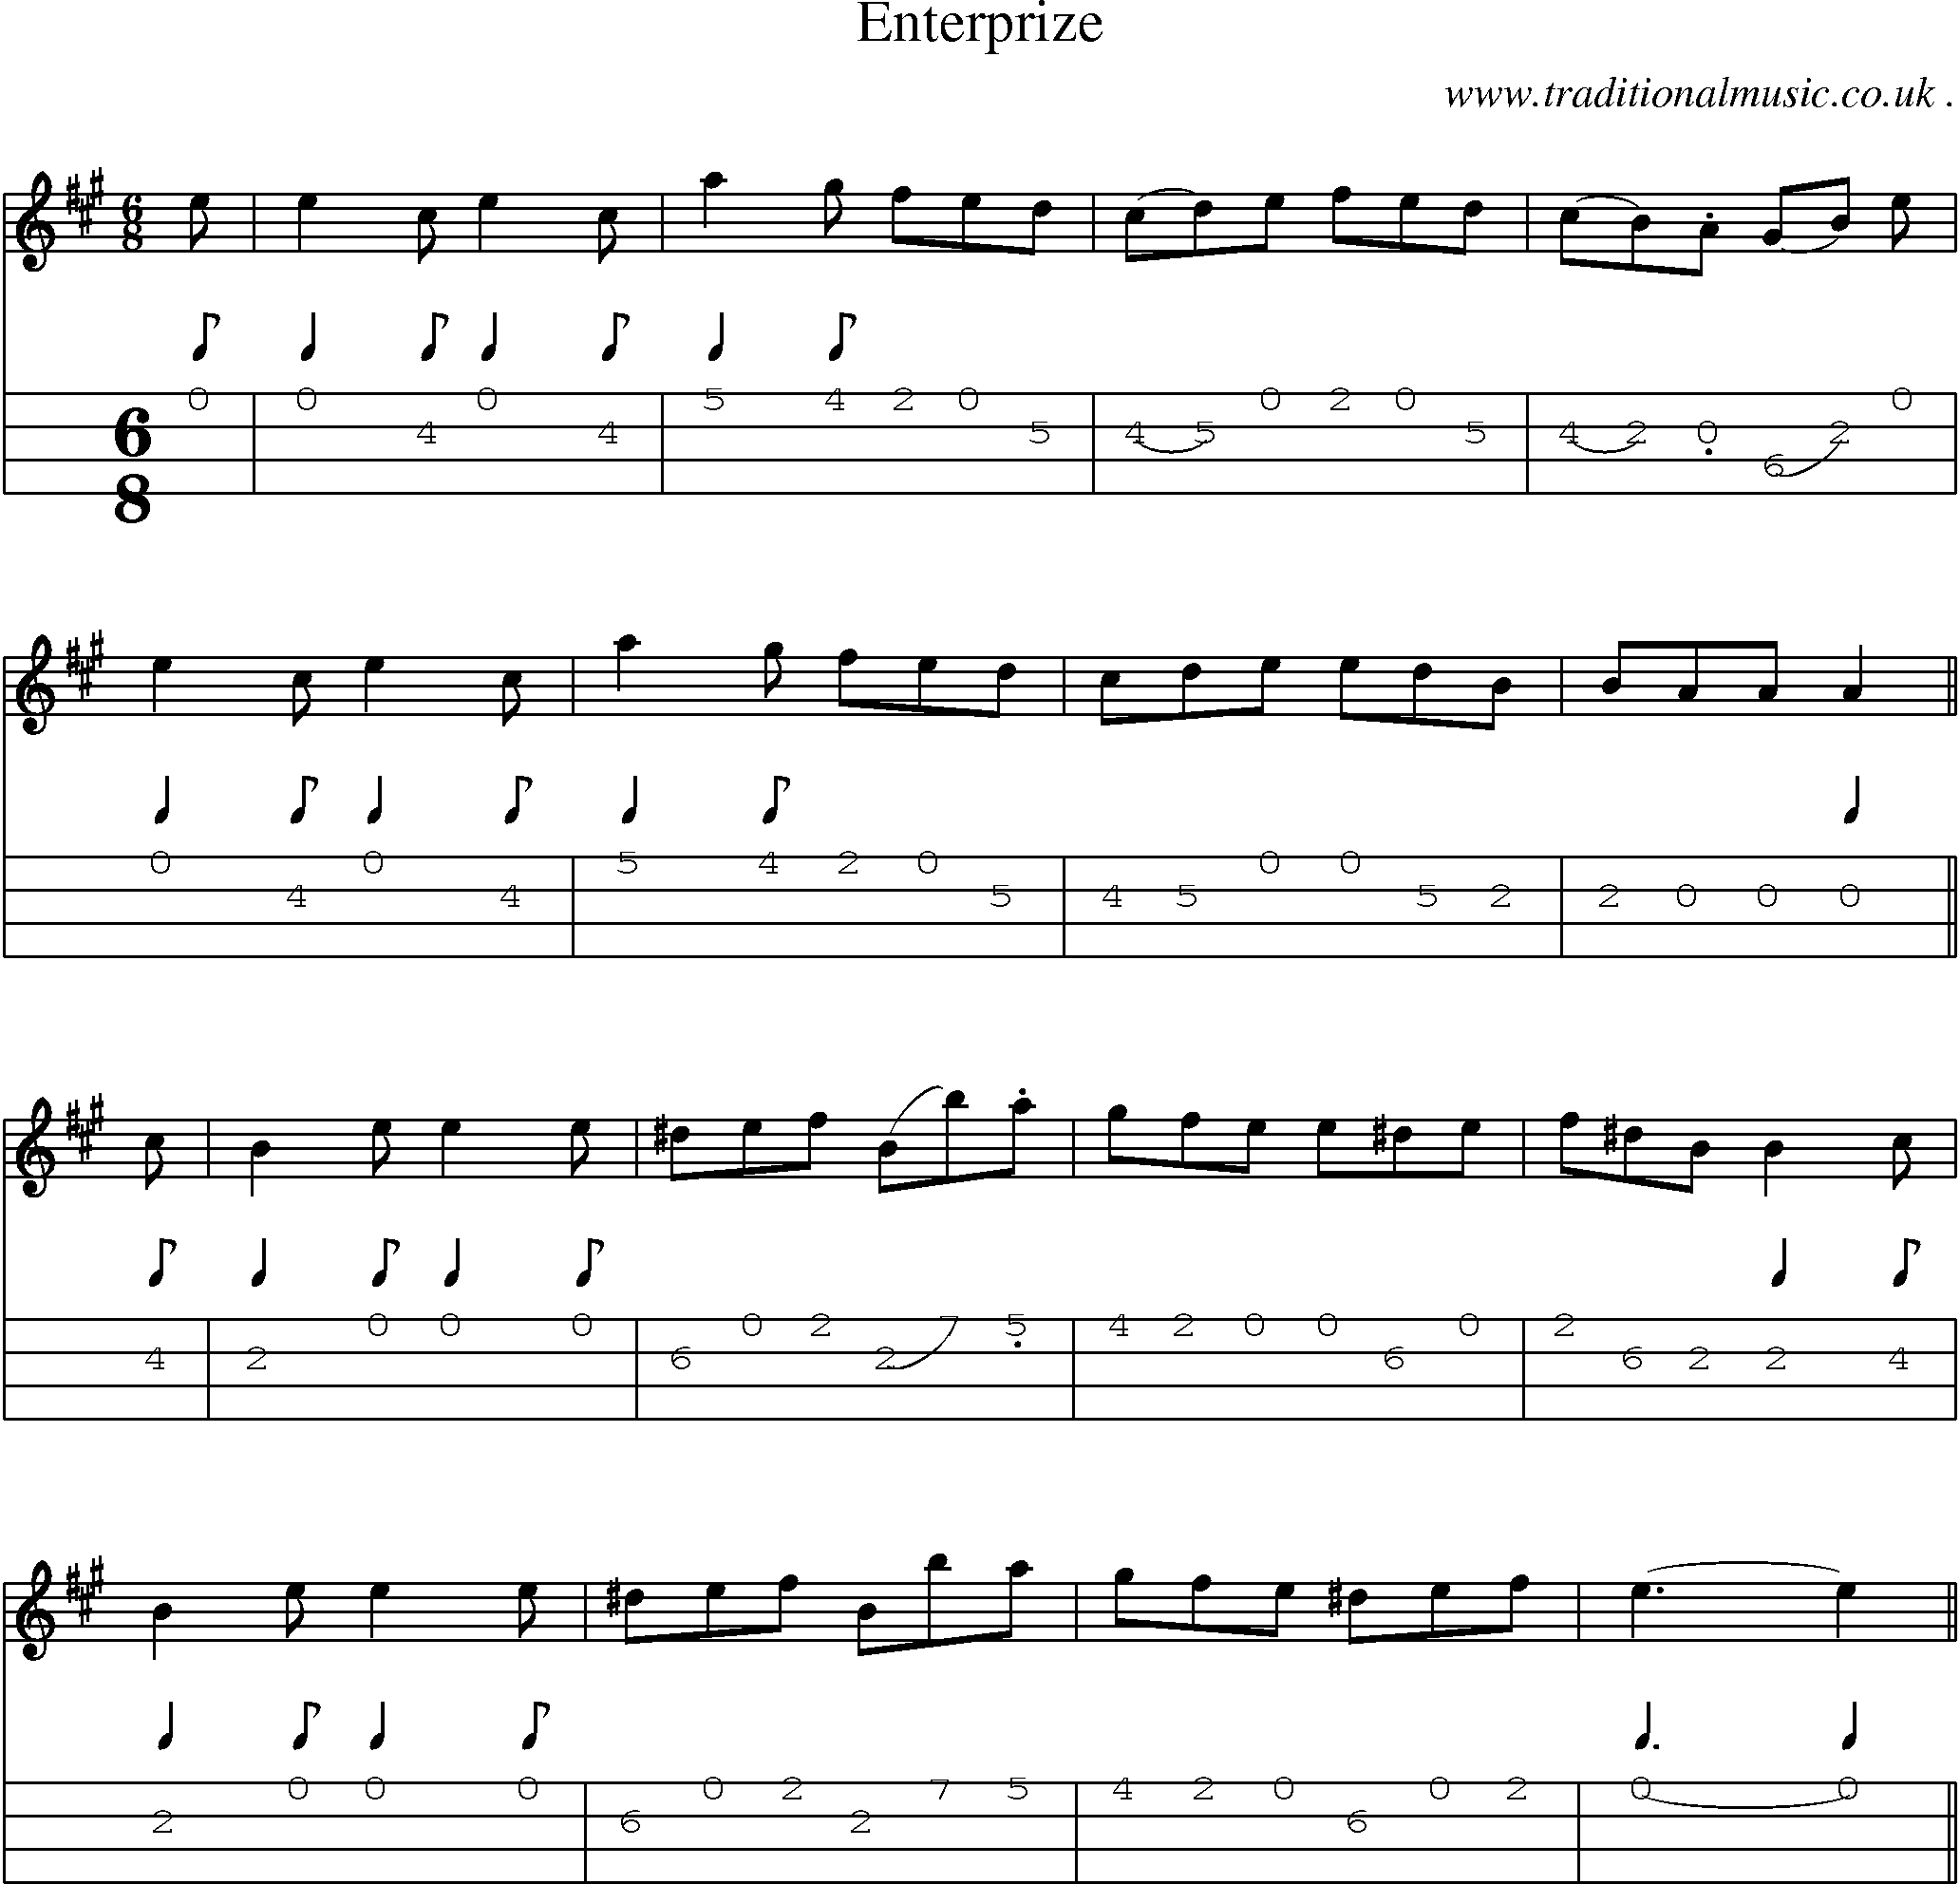 Sheet-Music and Mandolin Tabs for Enterprize